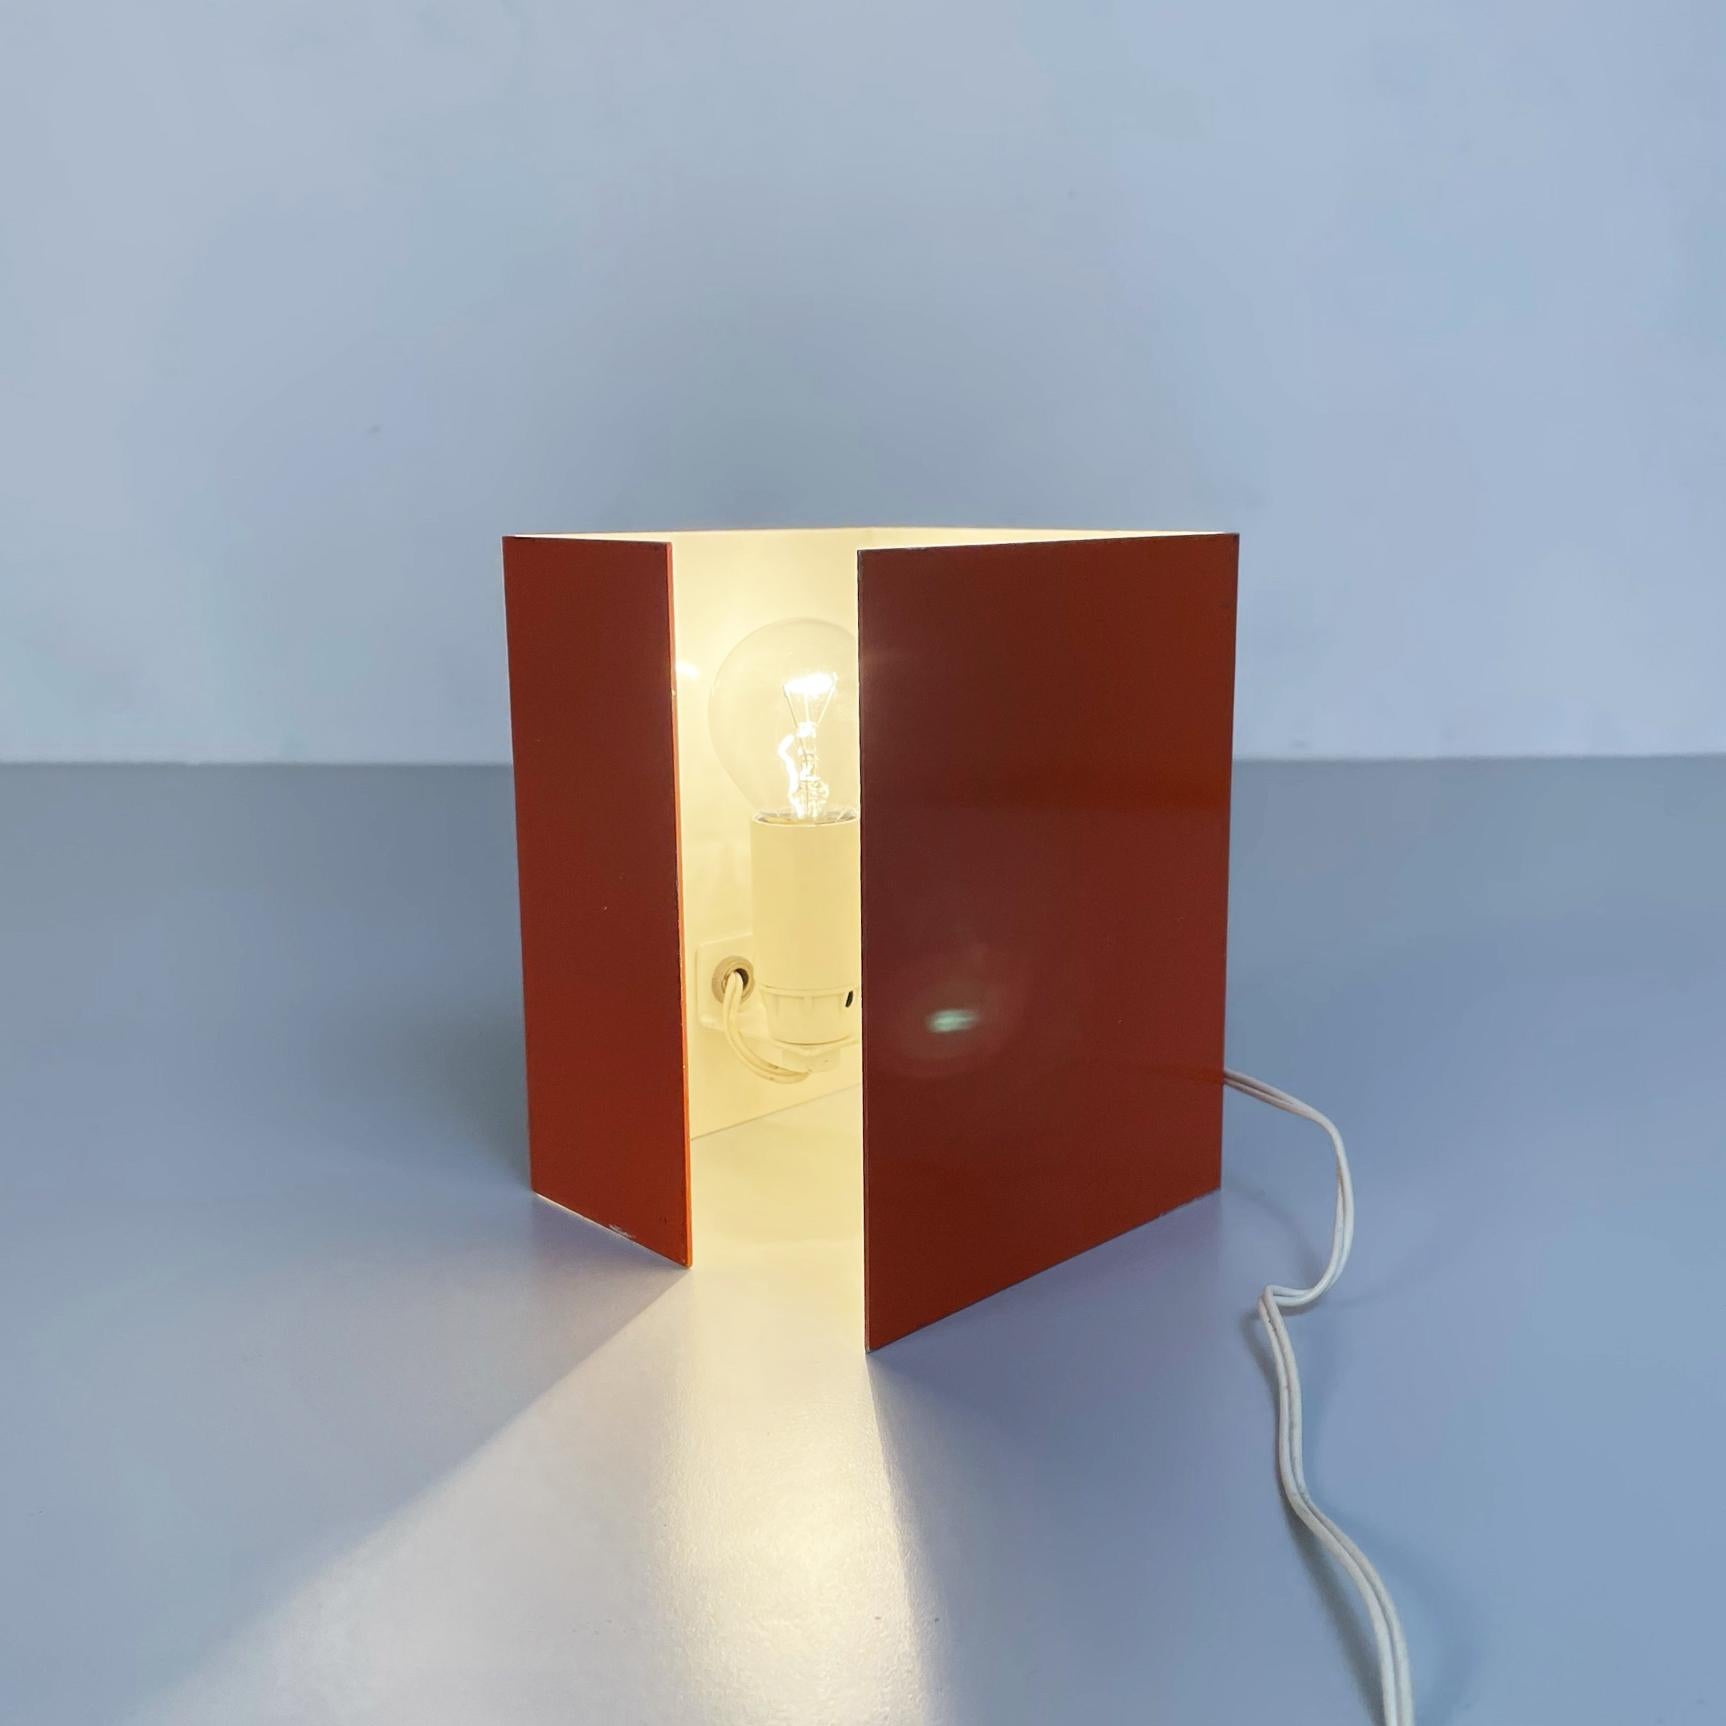 Italian Mid-Century Modern Orange sheet metal table lamp, 1970s
Table lamp composed of a sheet metal painted externally in orange and internally in white.
1970s
Good conditions.
Measurements in cm 11.5 × 11.5 x 15H
Available in different colors.